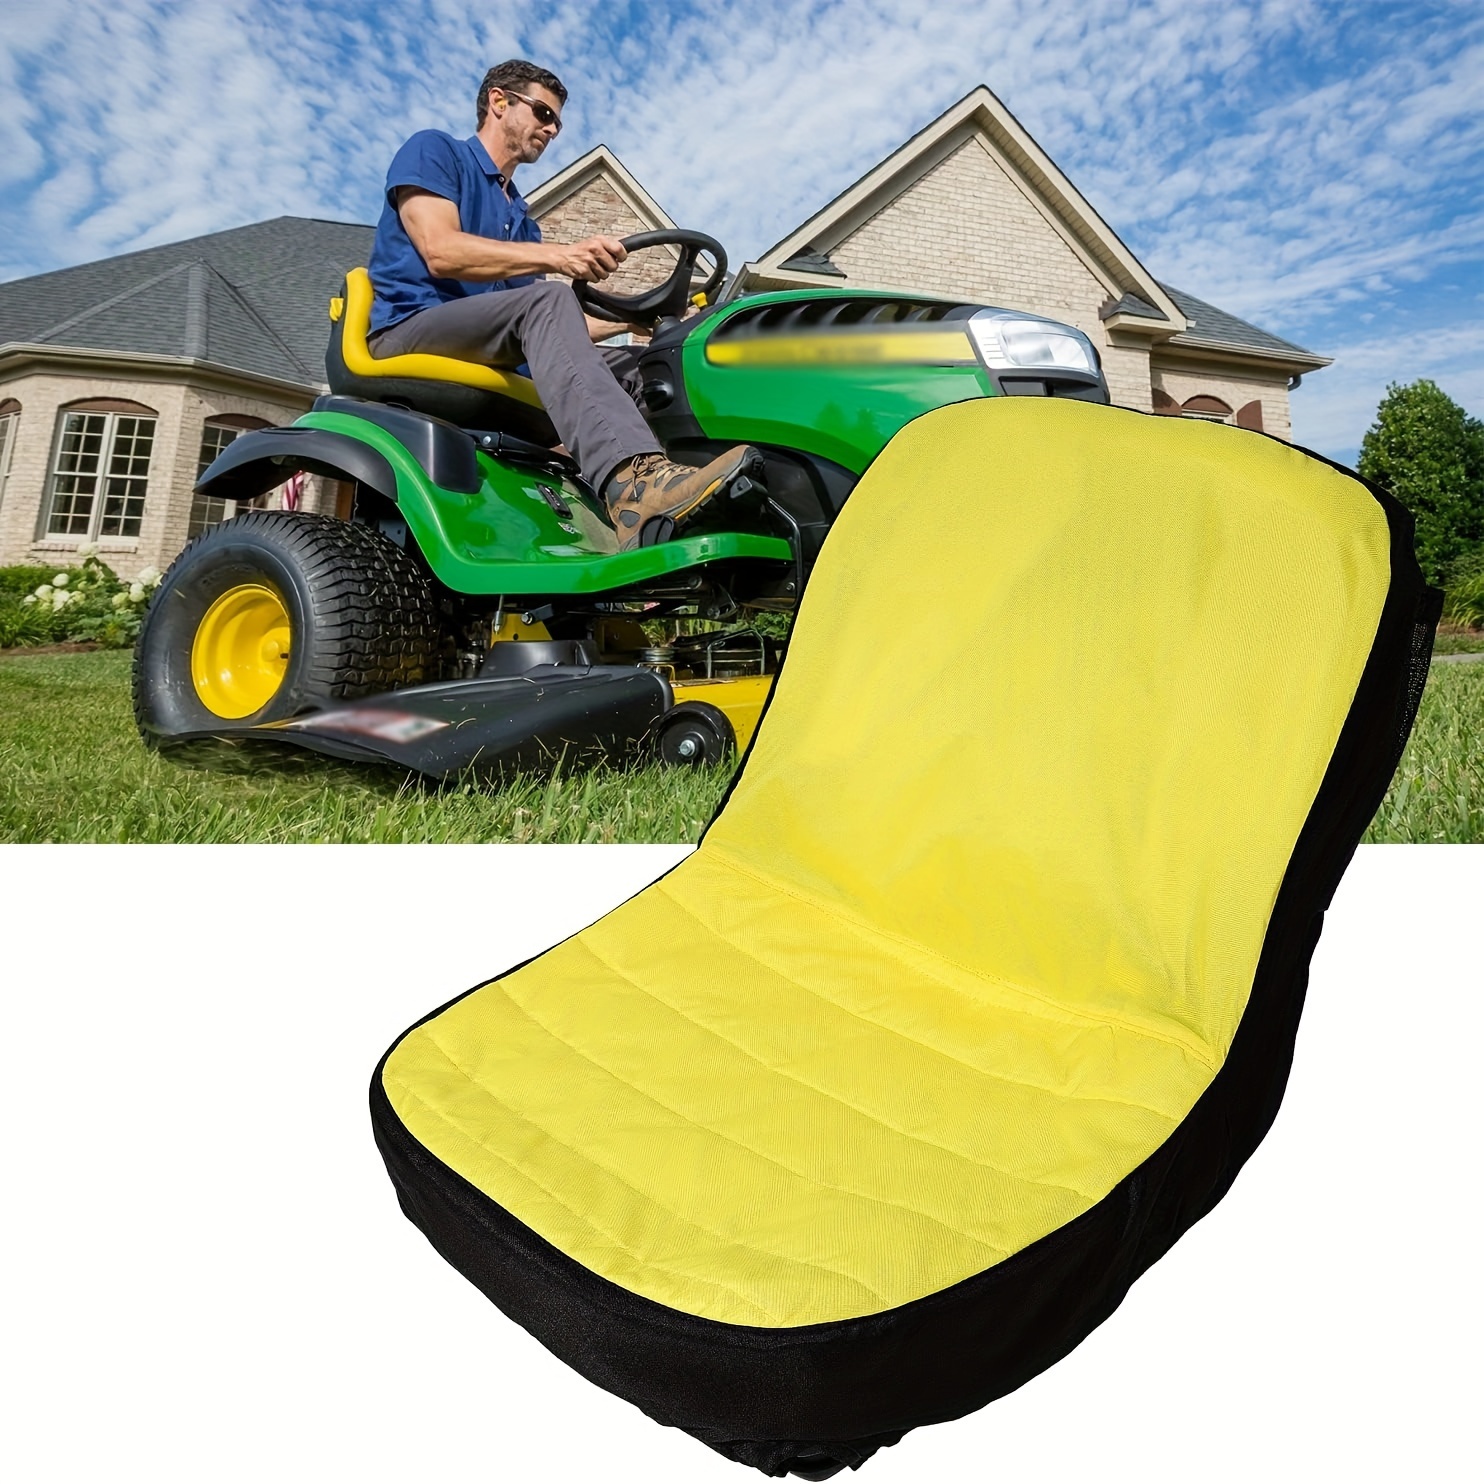 

Riding Lawn Mower Seat Cover Compatible With Tractors Gator Series, Durable Protective Cushion With Elastic Cord For Secure Fit, Easy Installation, Up To 18-inch Seats - Lp92334